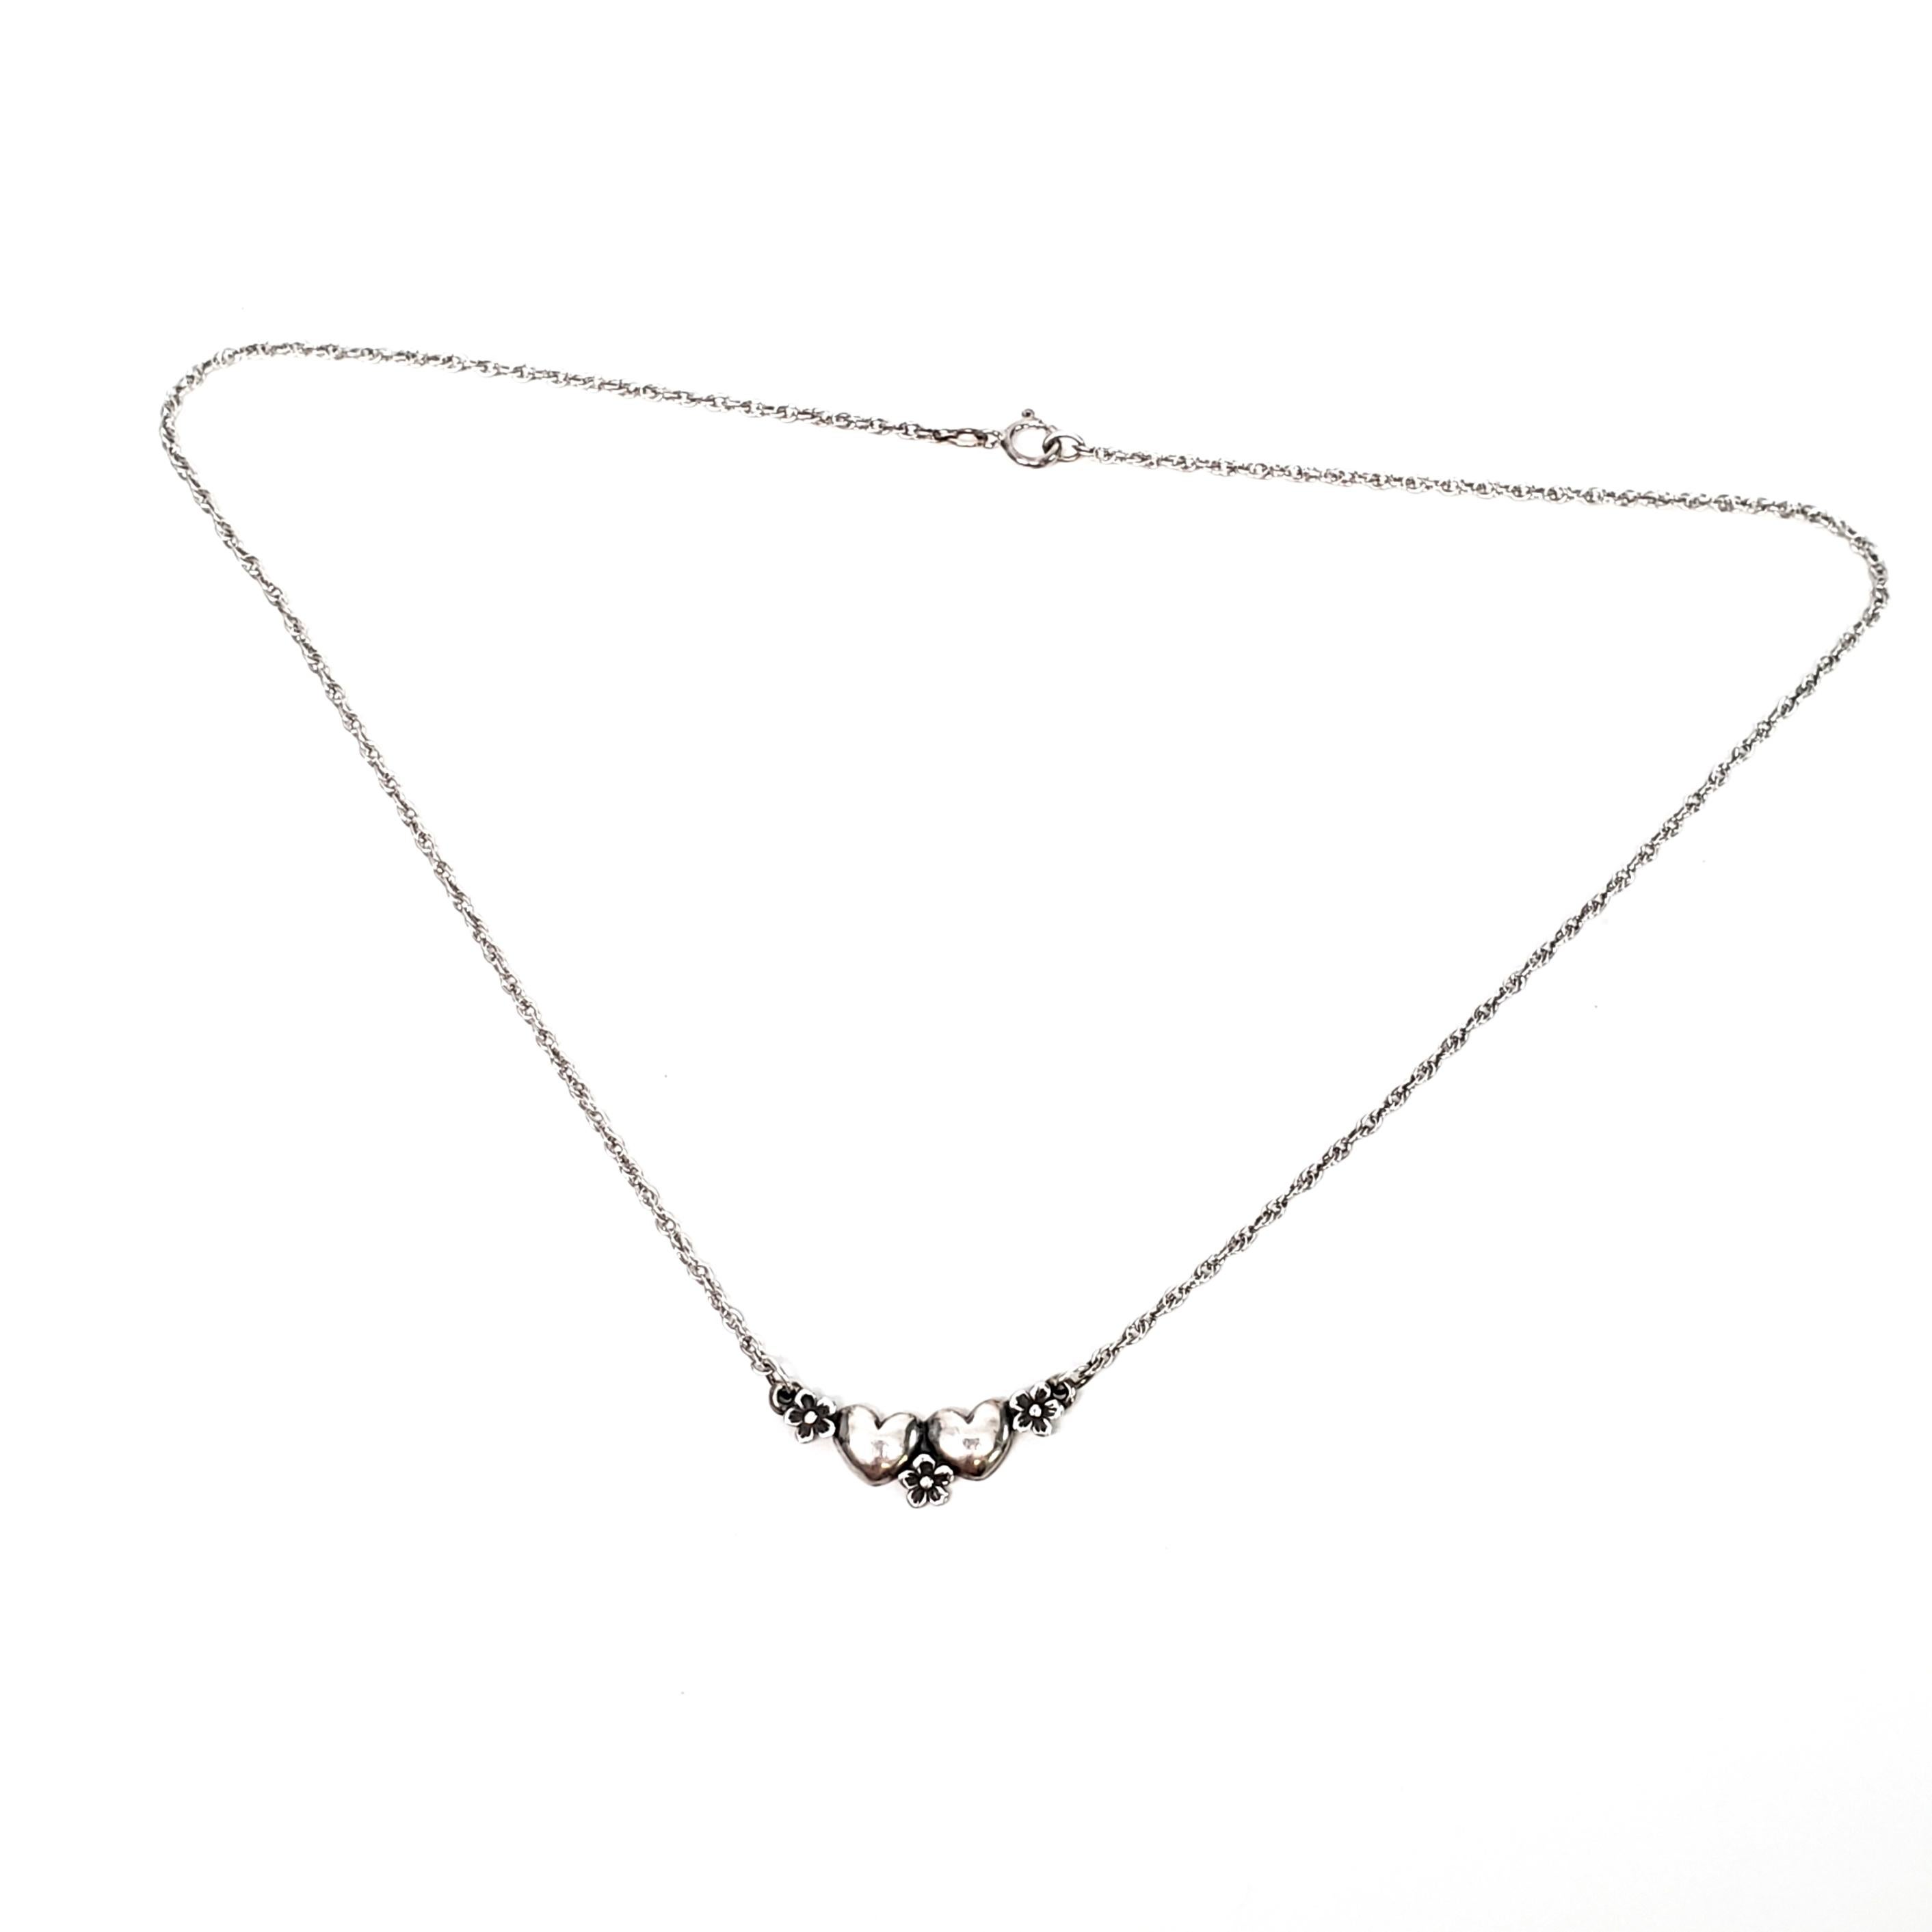 James Avery sterling silver Hearts and Flowers necklace.

Sweet and delicate necklace featuring double hearts with three small flowers on a chain necklace.

Matching bracelet also available in separate listing (#6994)

Measures 16